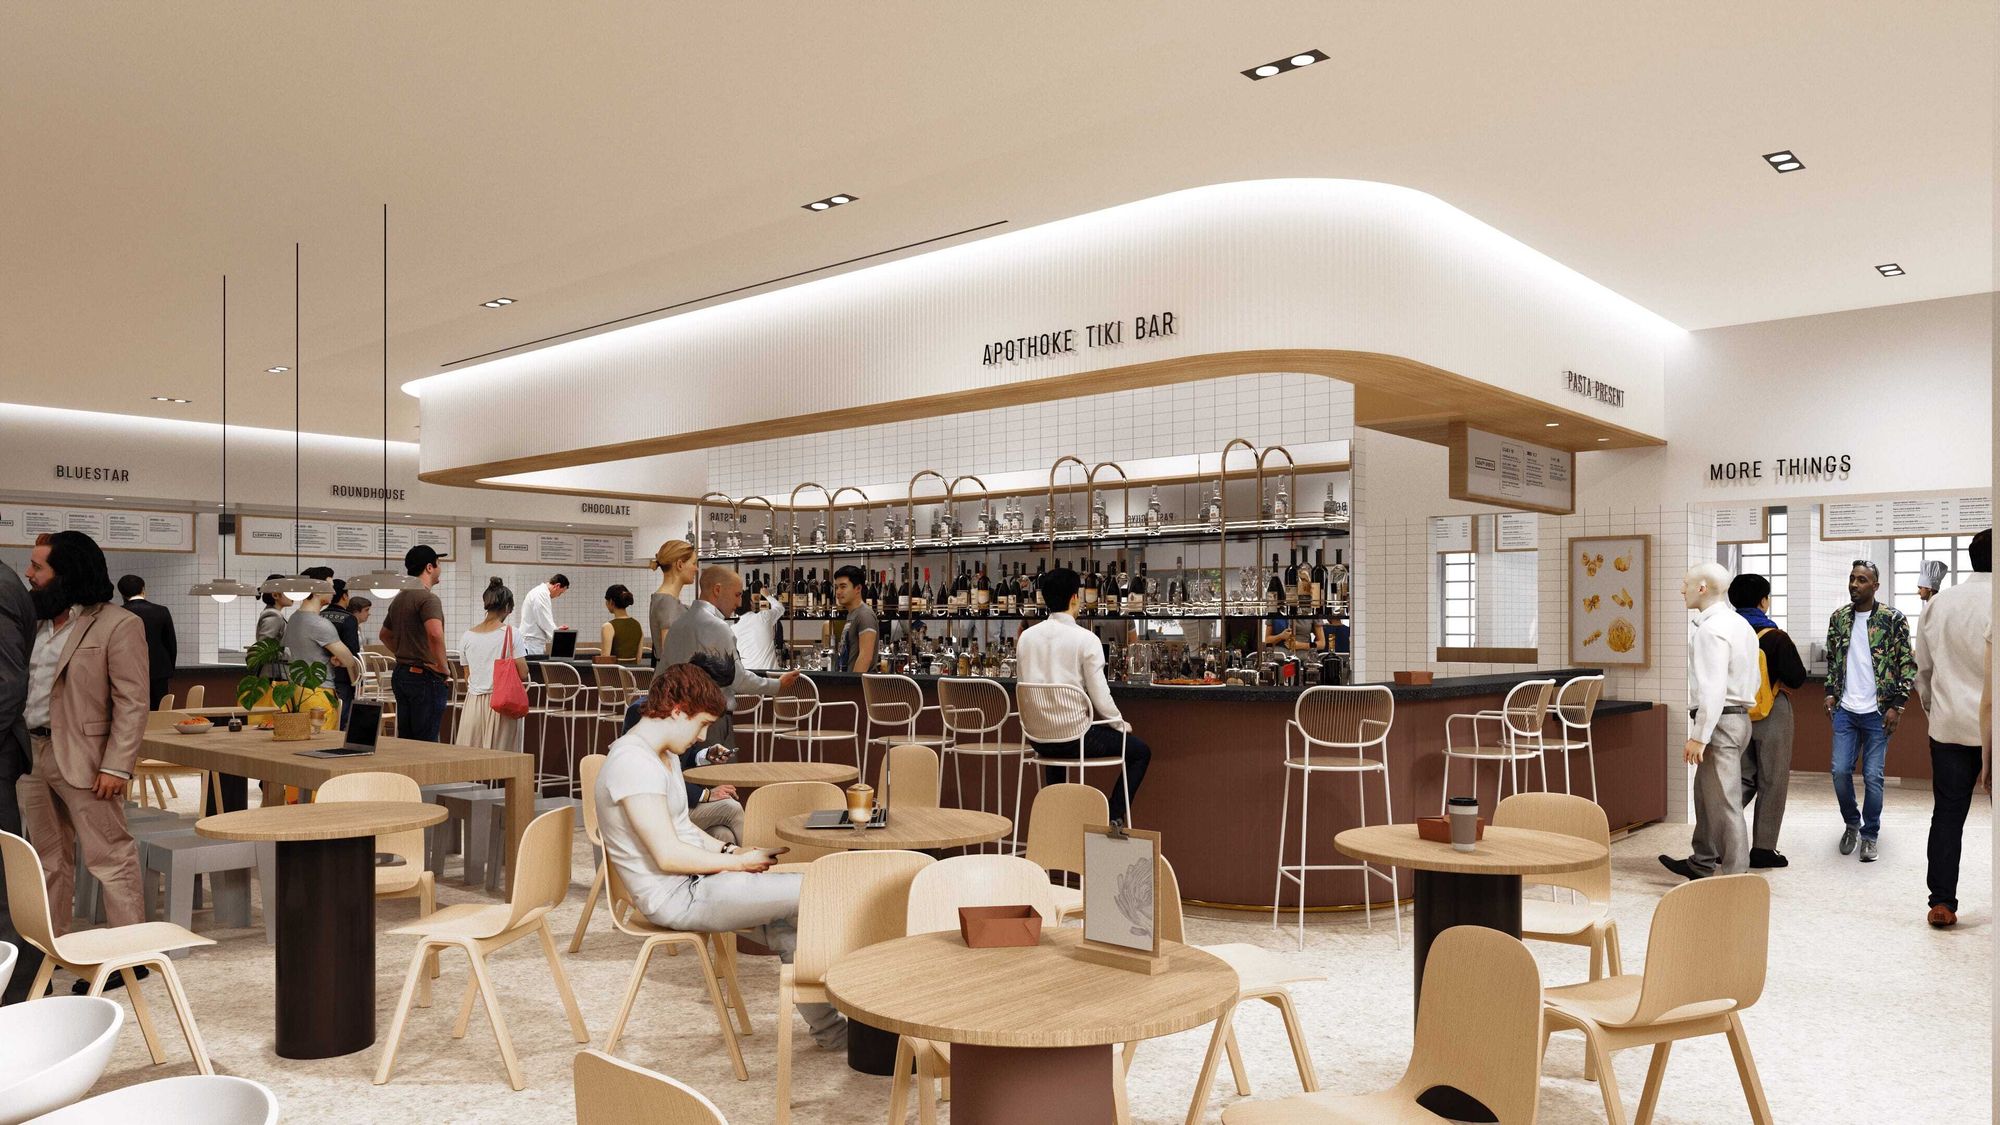 CloudKitchens Tests Hybrid Time Out Market-Style Food Halls